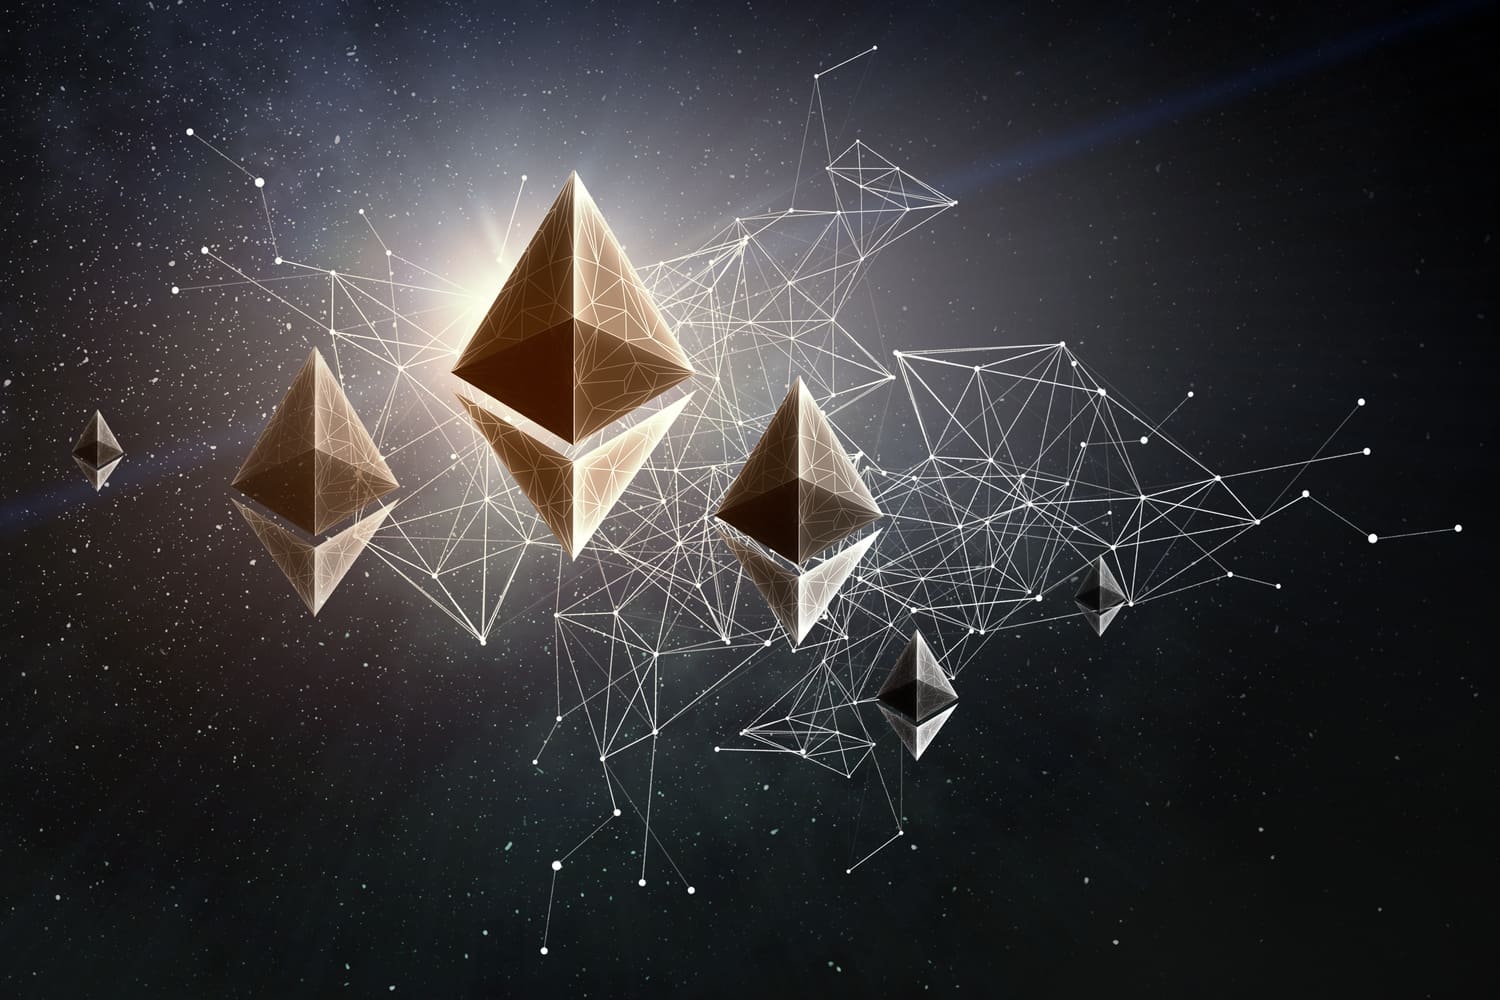 Ether’s price could decouple from other cryptocurrencies, Chainalysis predicts